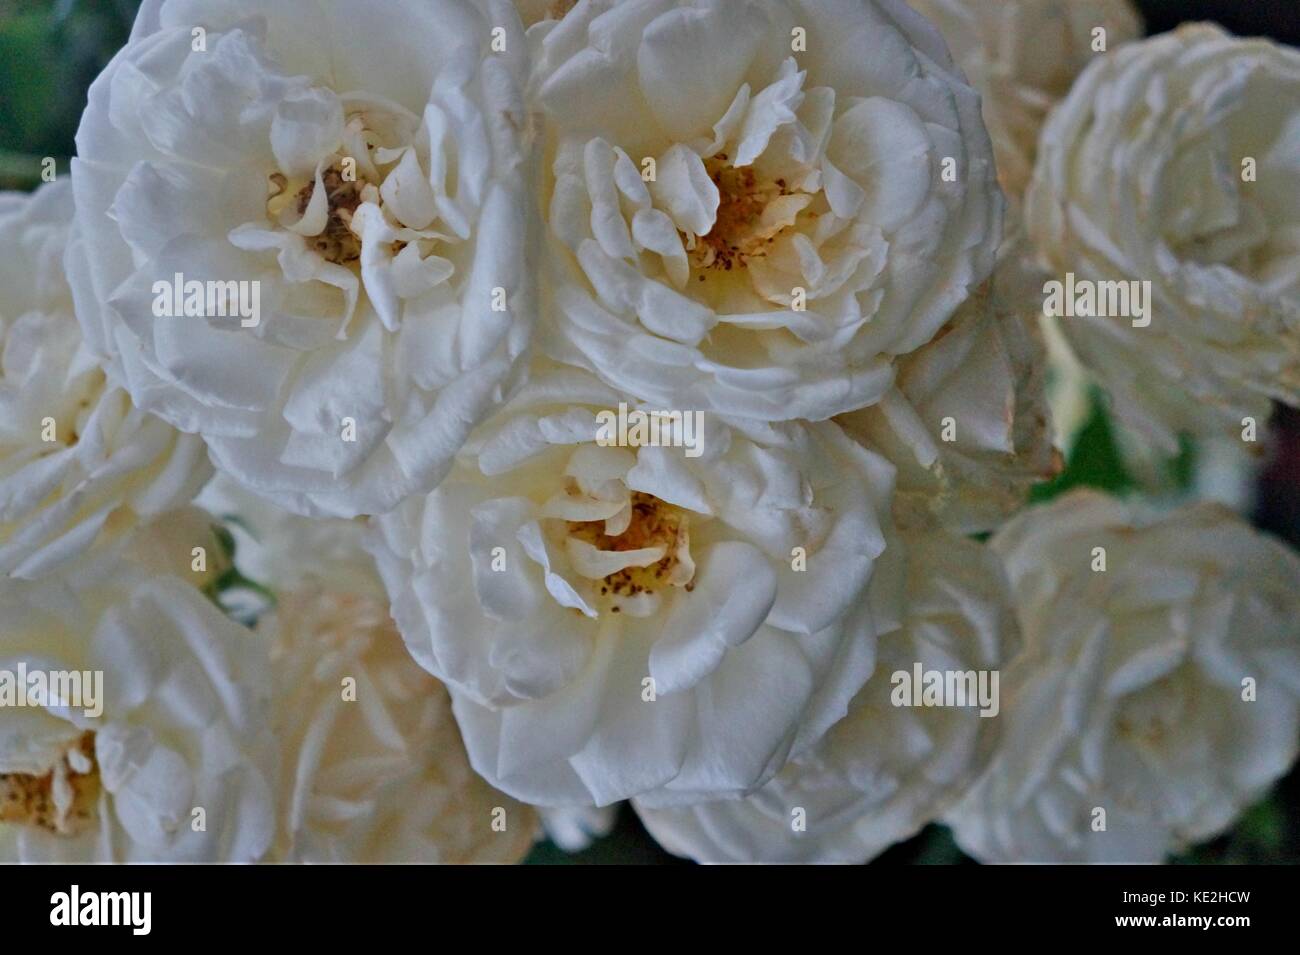 White and little roses. Stock Photo